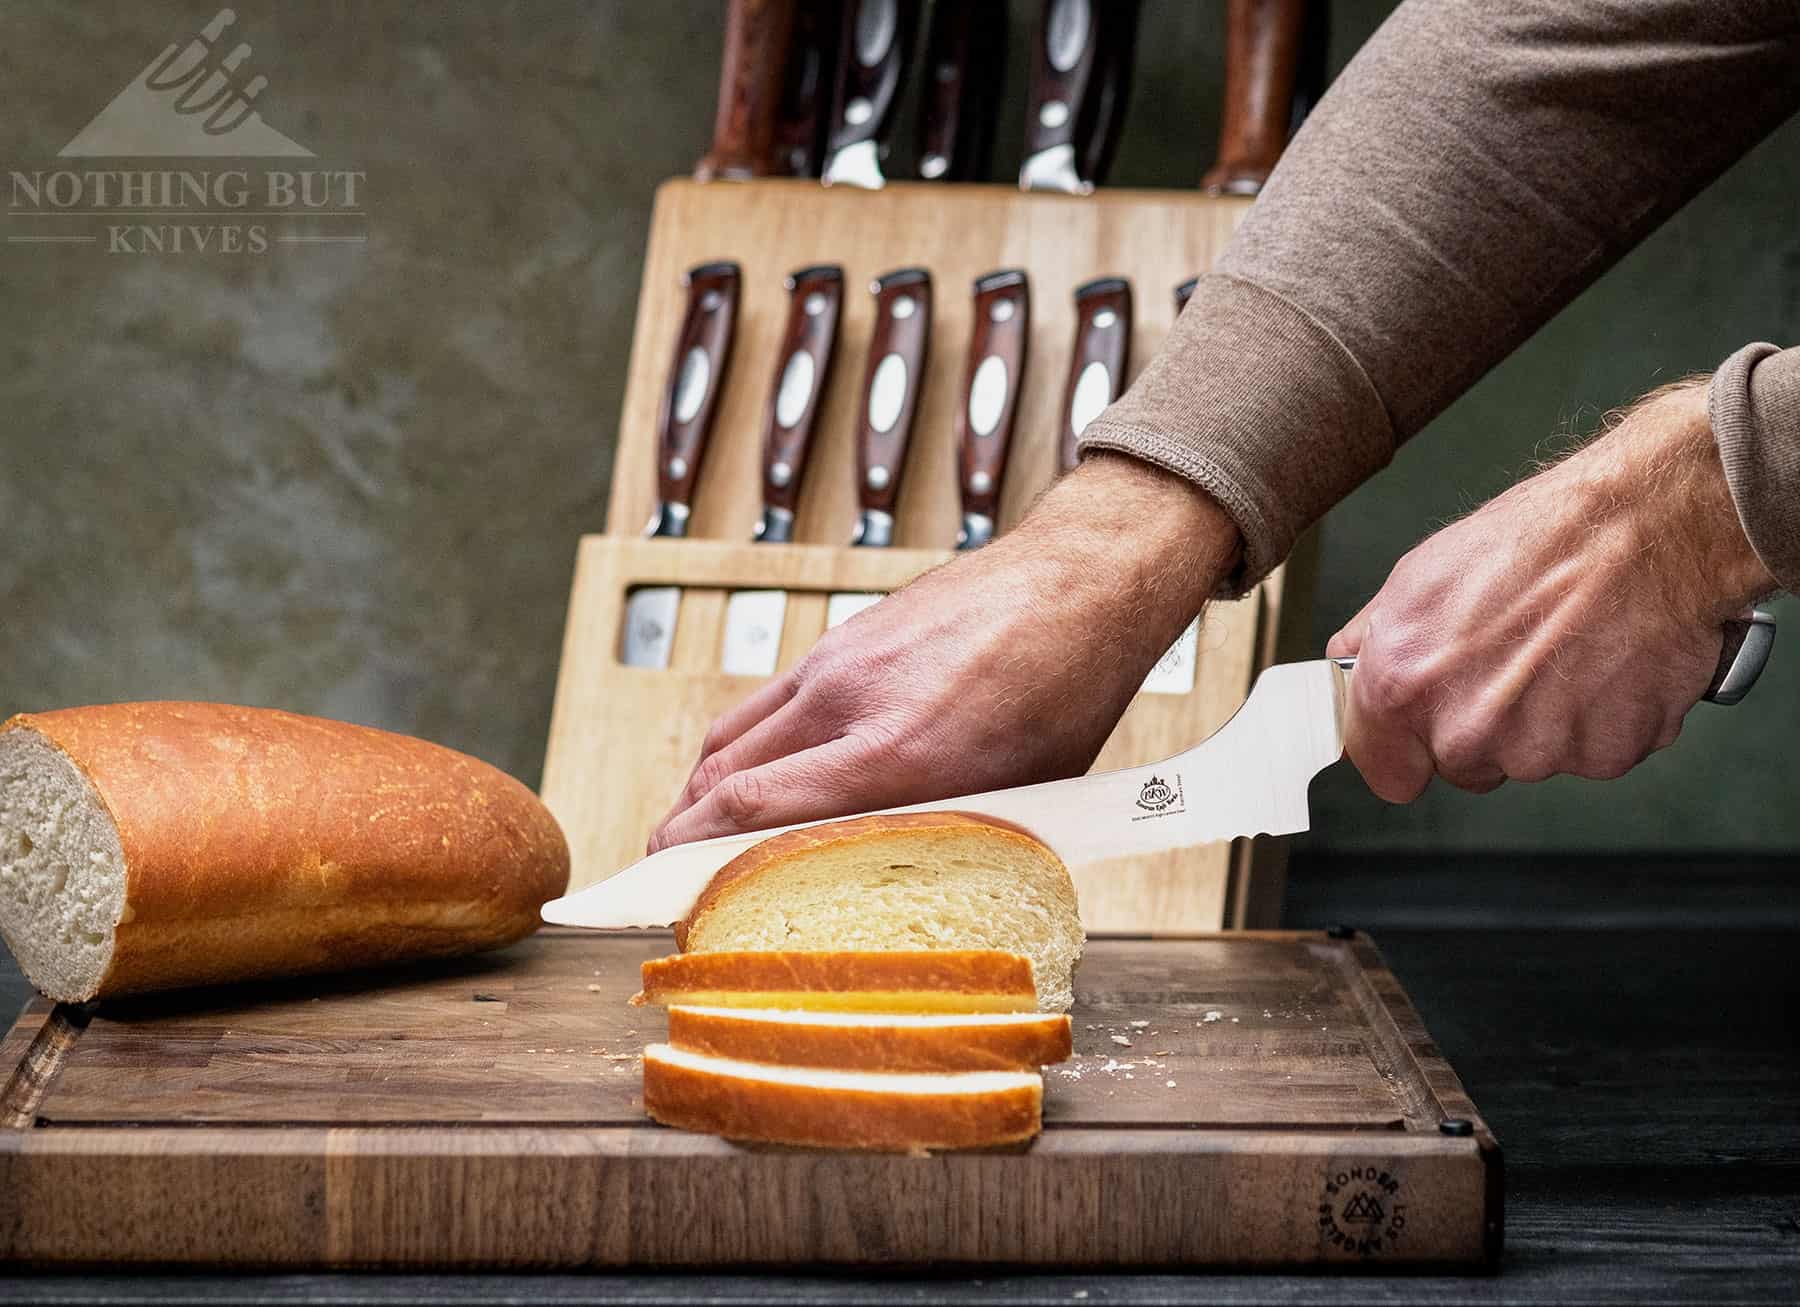 The off-set bread knife included in this set is a standout performer. 